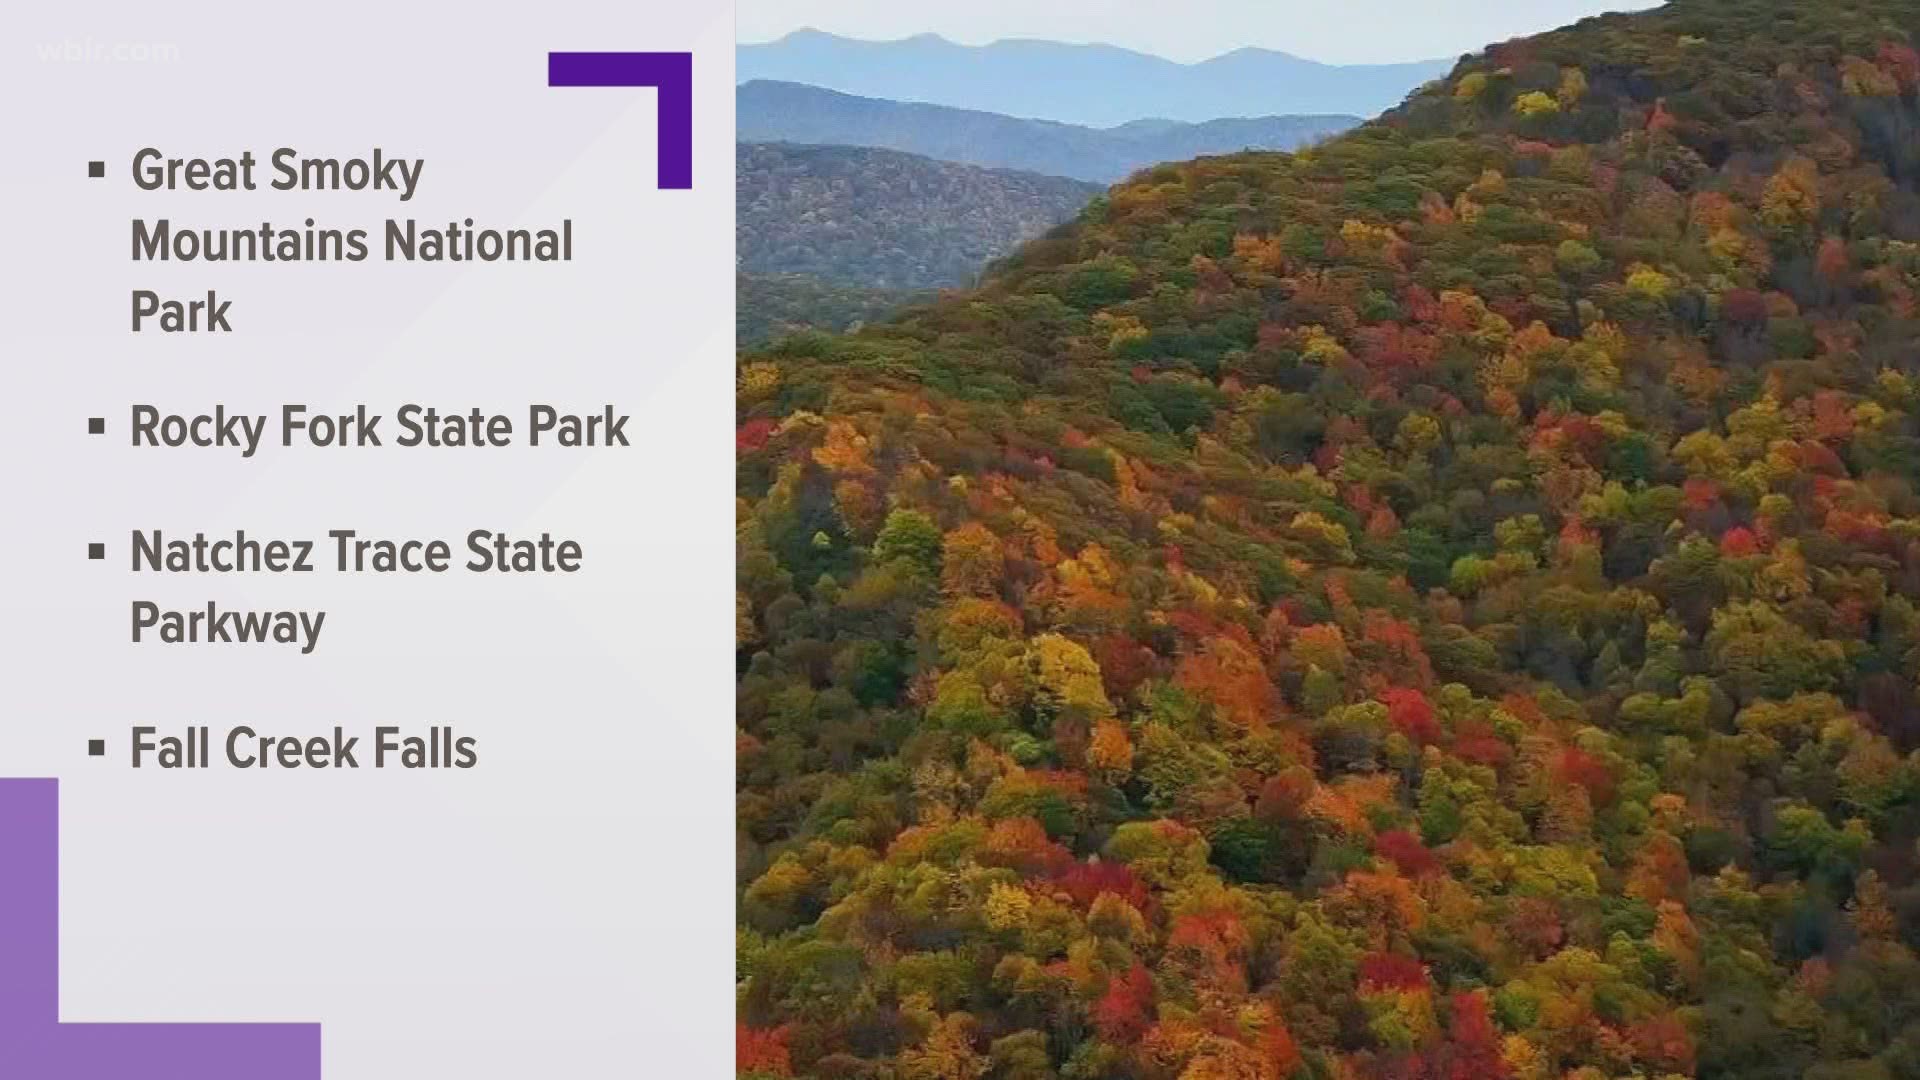 State naturalist Randy Hedgpath recommends going up to the Smokies or heading to Unicoi County for Rocky Fork State Park.